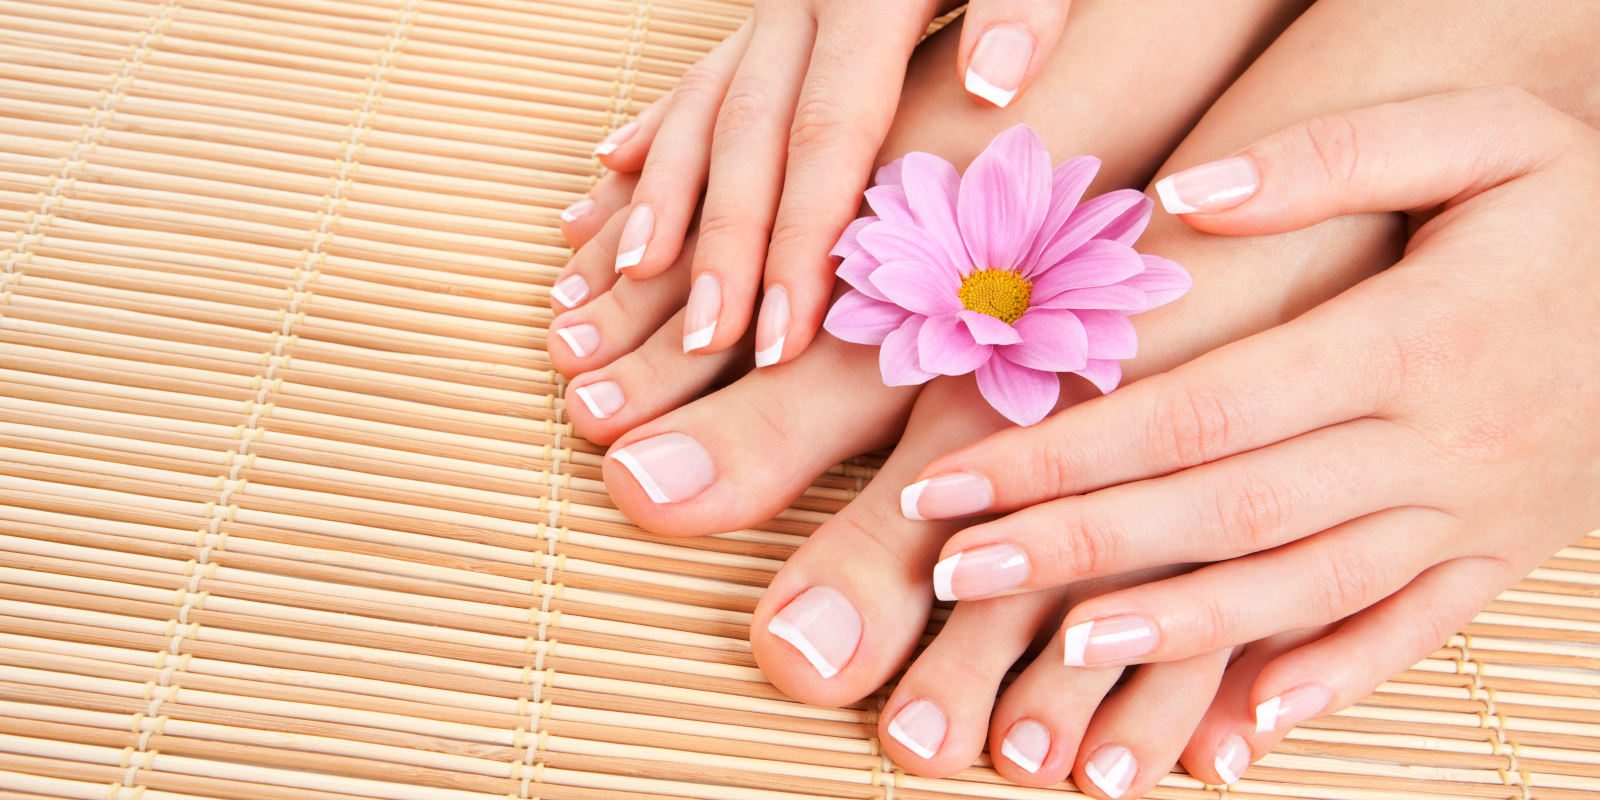 6. Manicure and Pedicure in Greeley - wide 10